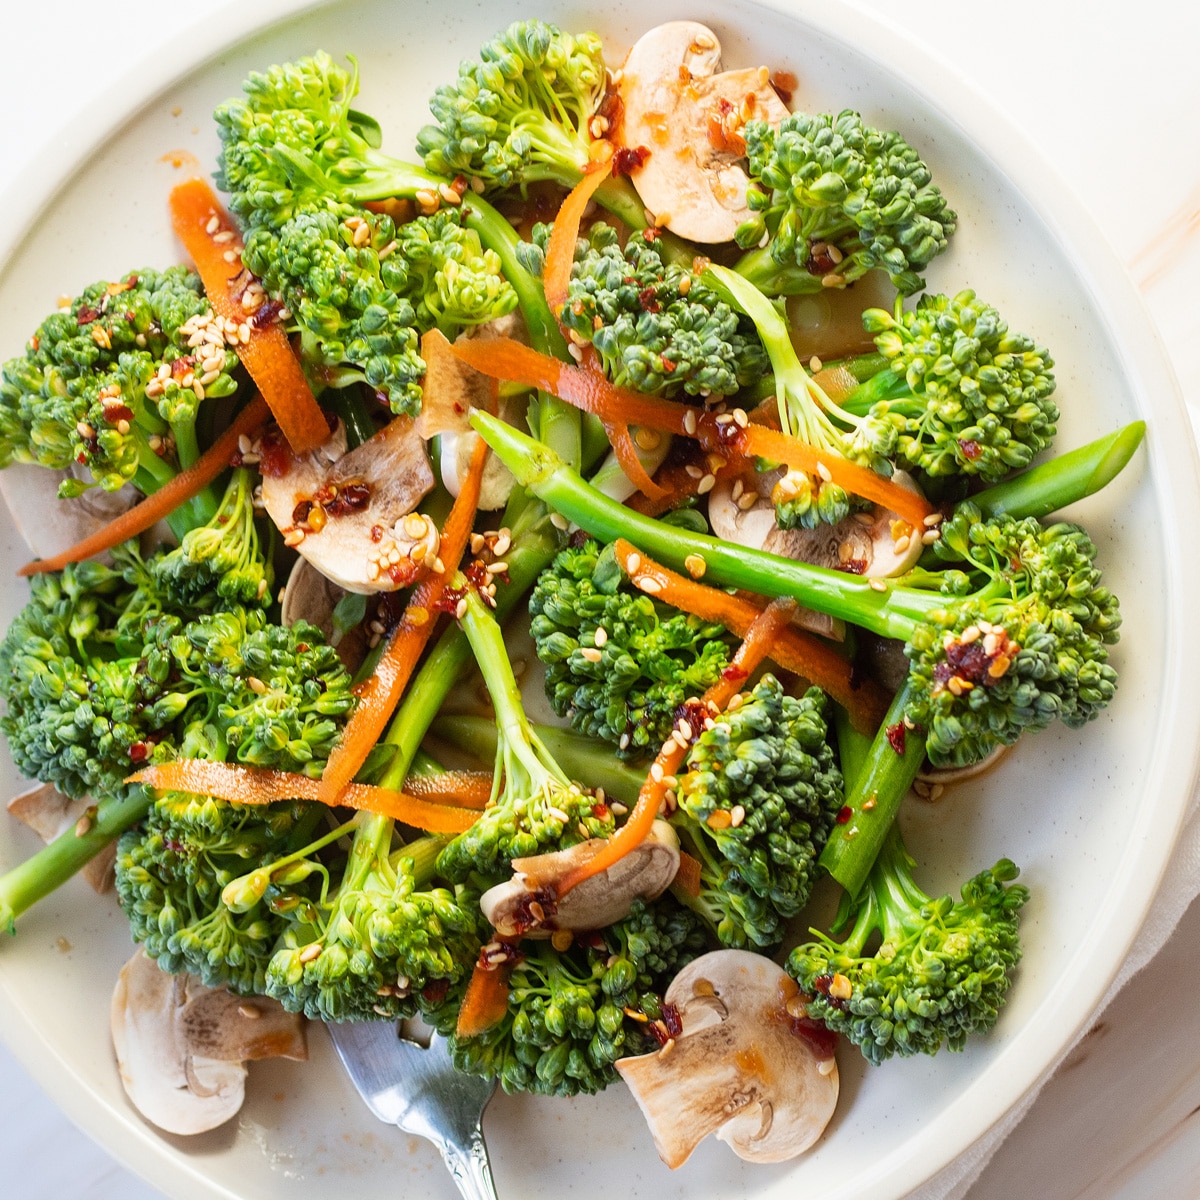 Broccolini salad on white plate with mushrooms, shaved carrots, and light Asian dressing.